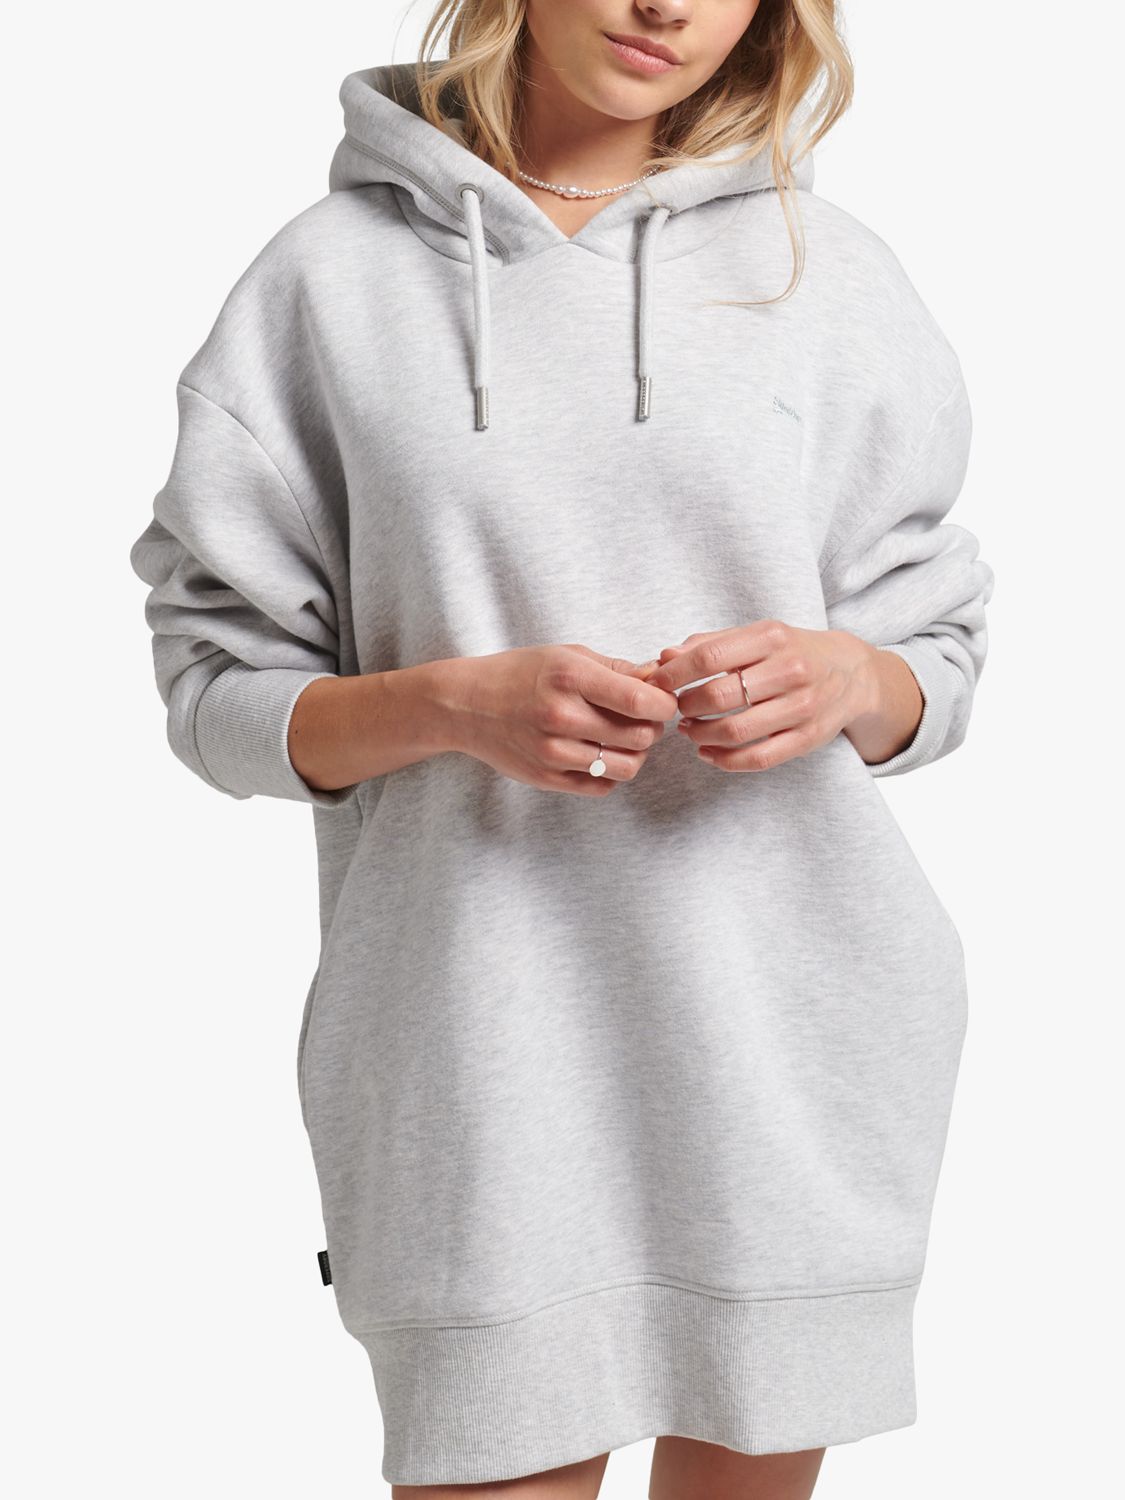 Superdry Embroidered Logo Hoodie Mini Dress at John Lewis & Partners